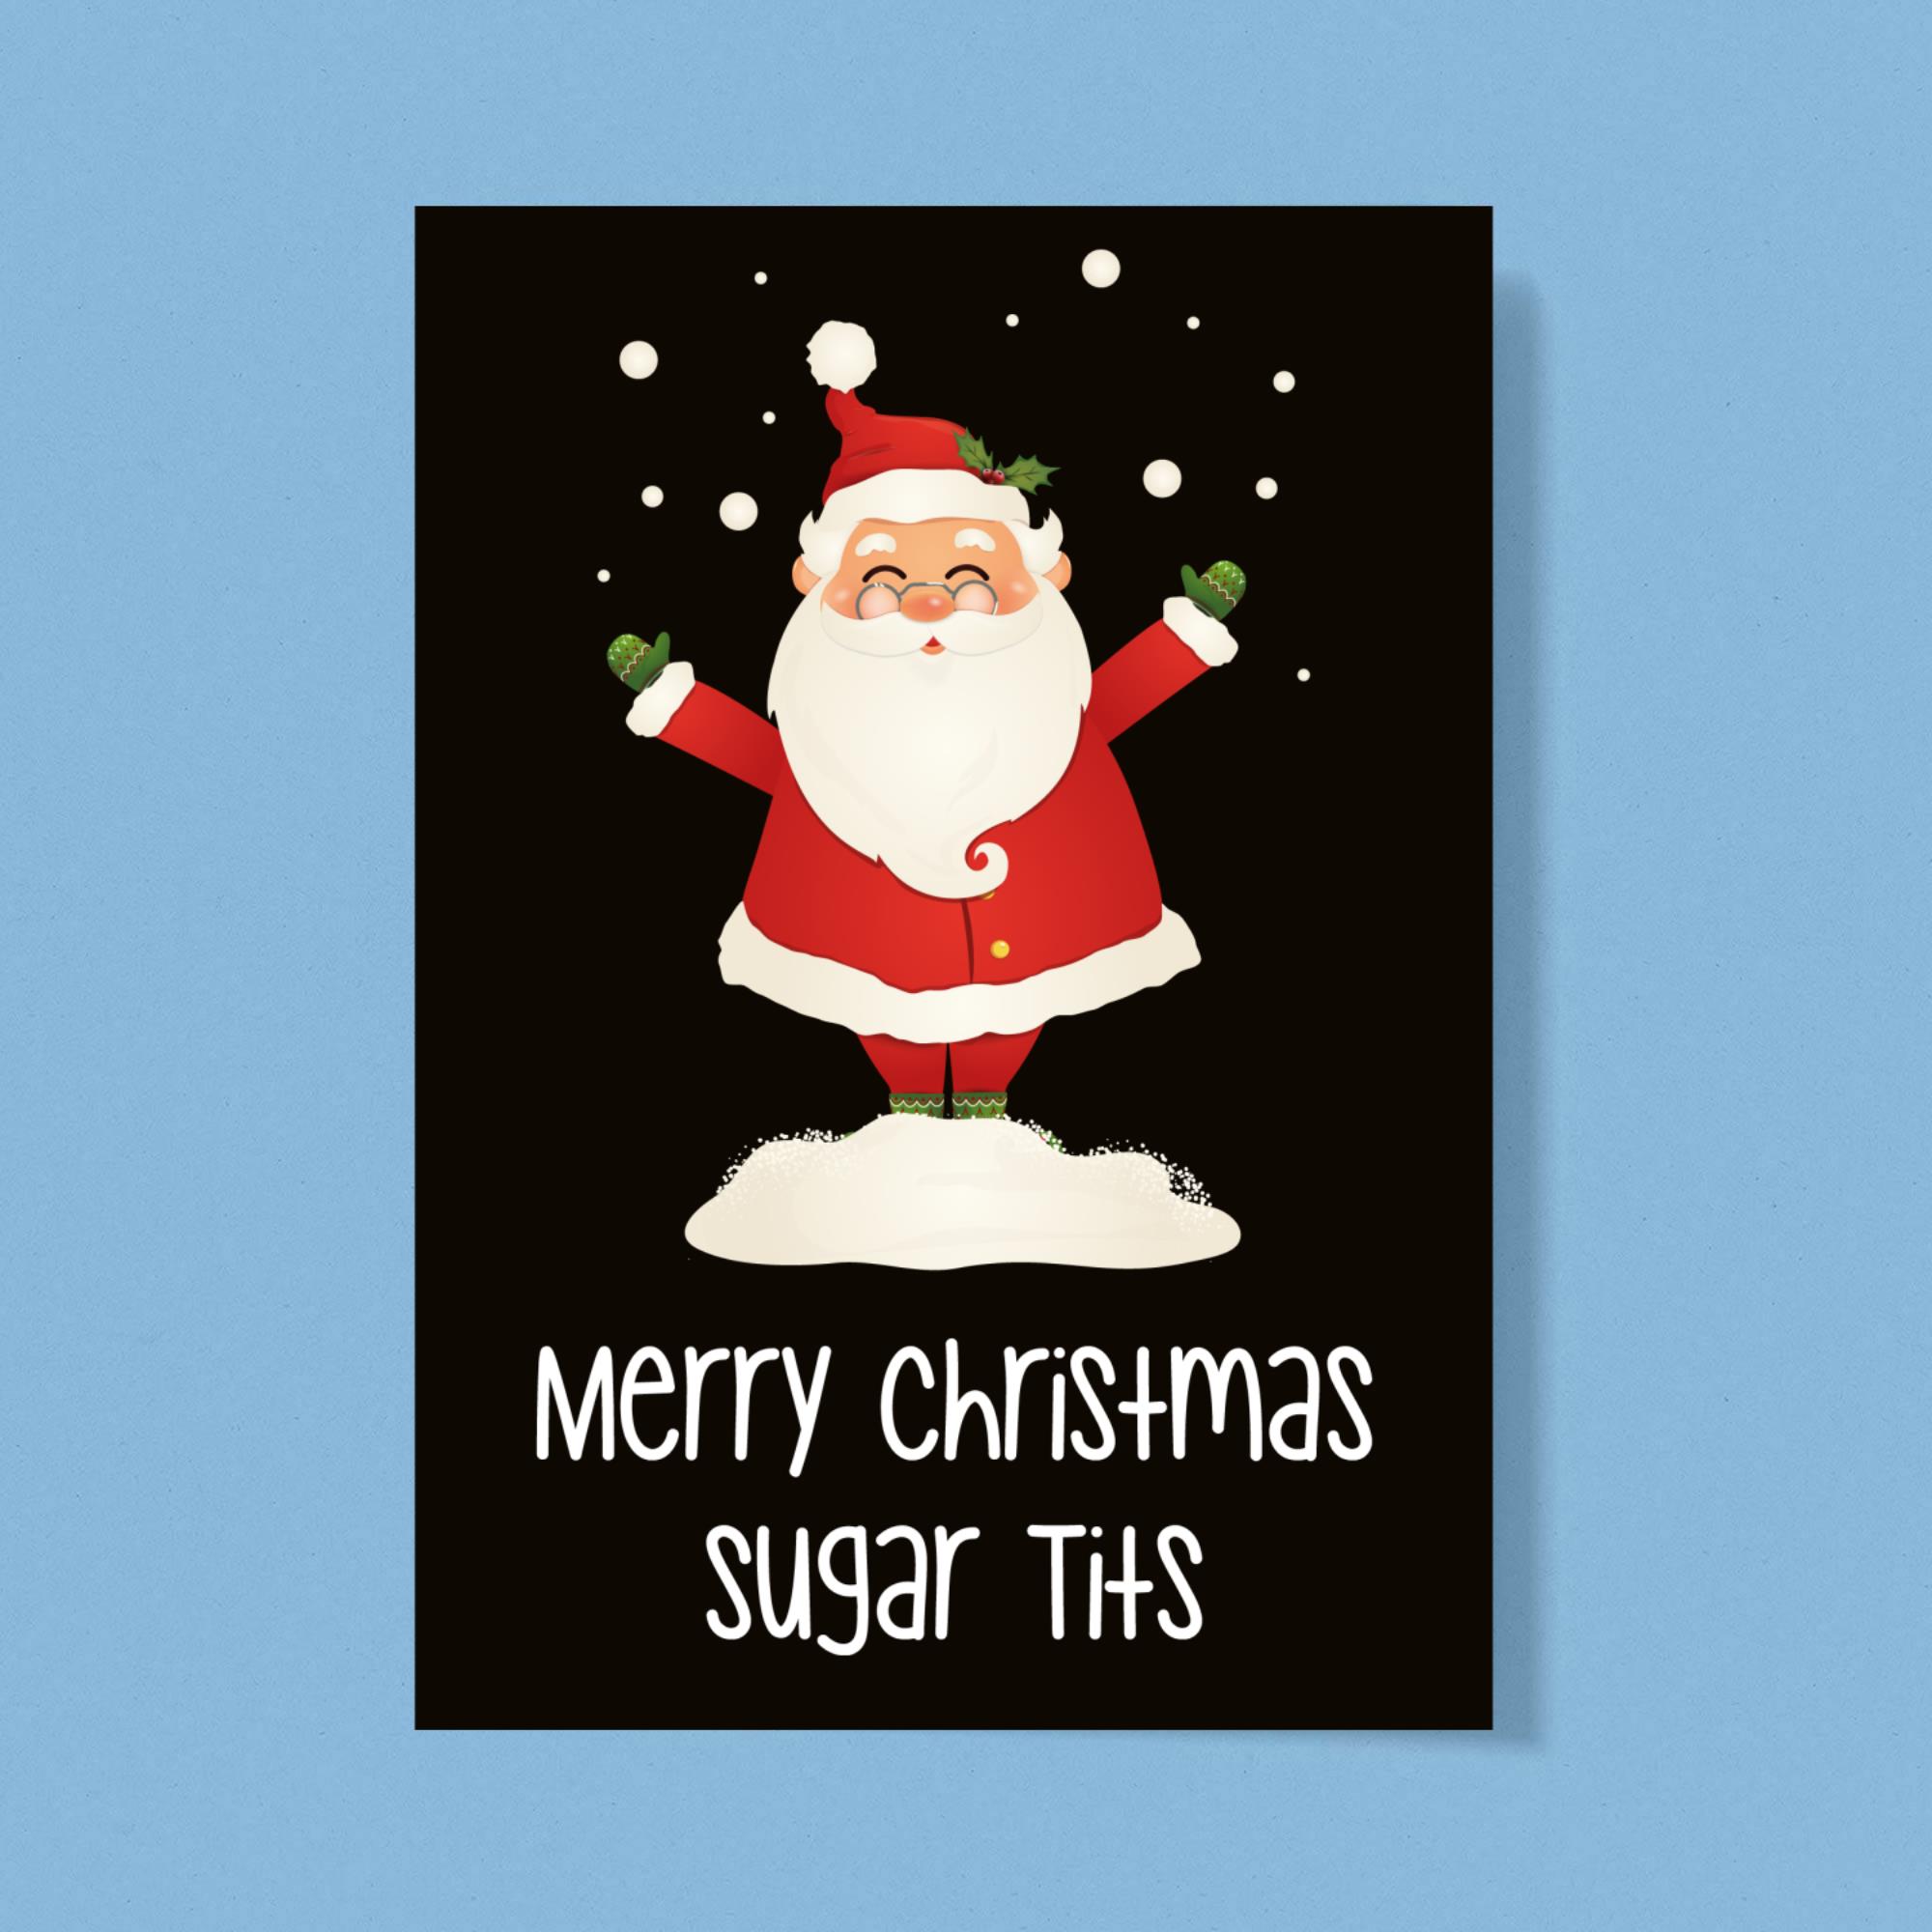 Merry Christmas Sugar Tits Greeting Card Rude Cards Slightly Disturbed